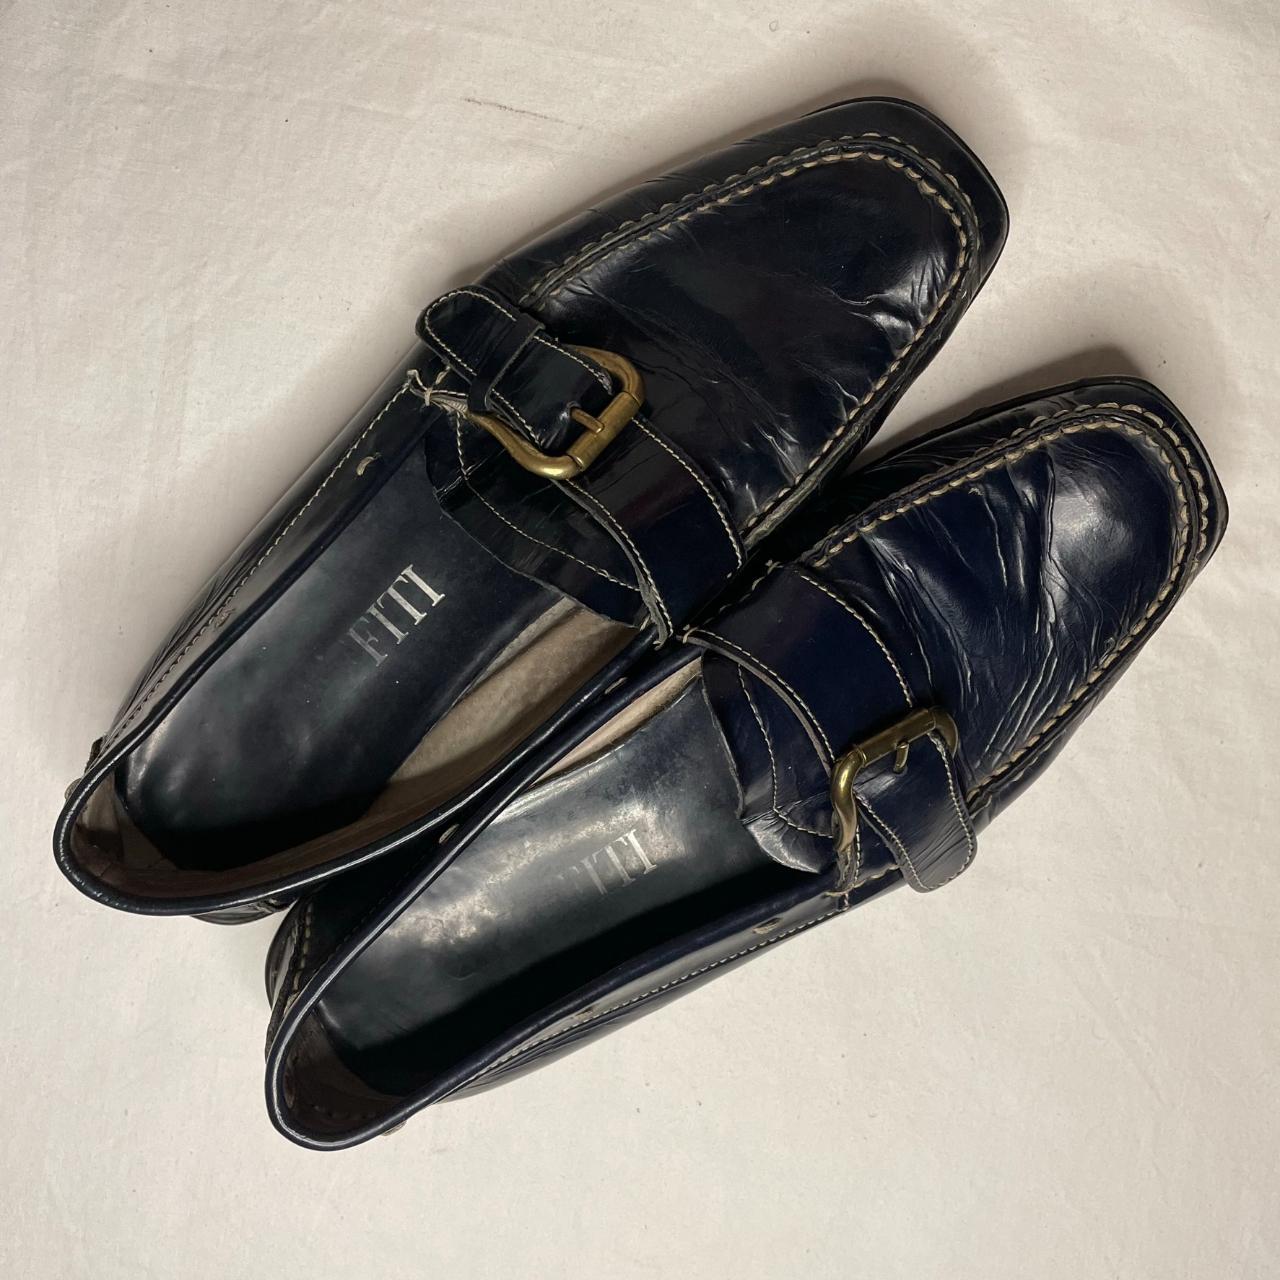 GRAFFITI Navy Loafers Vintage Condition - See... - Depop